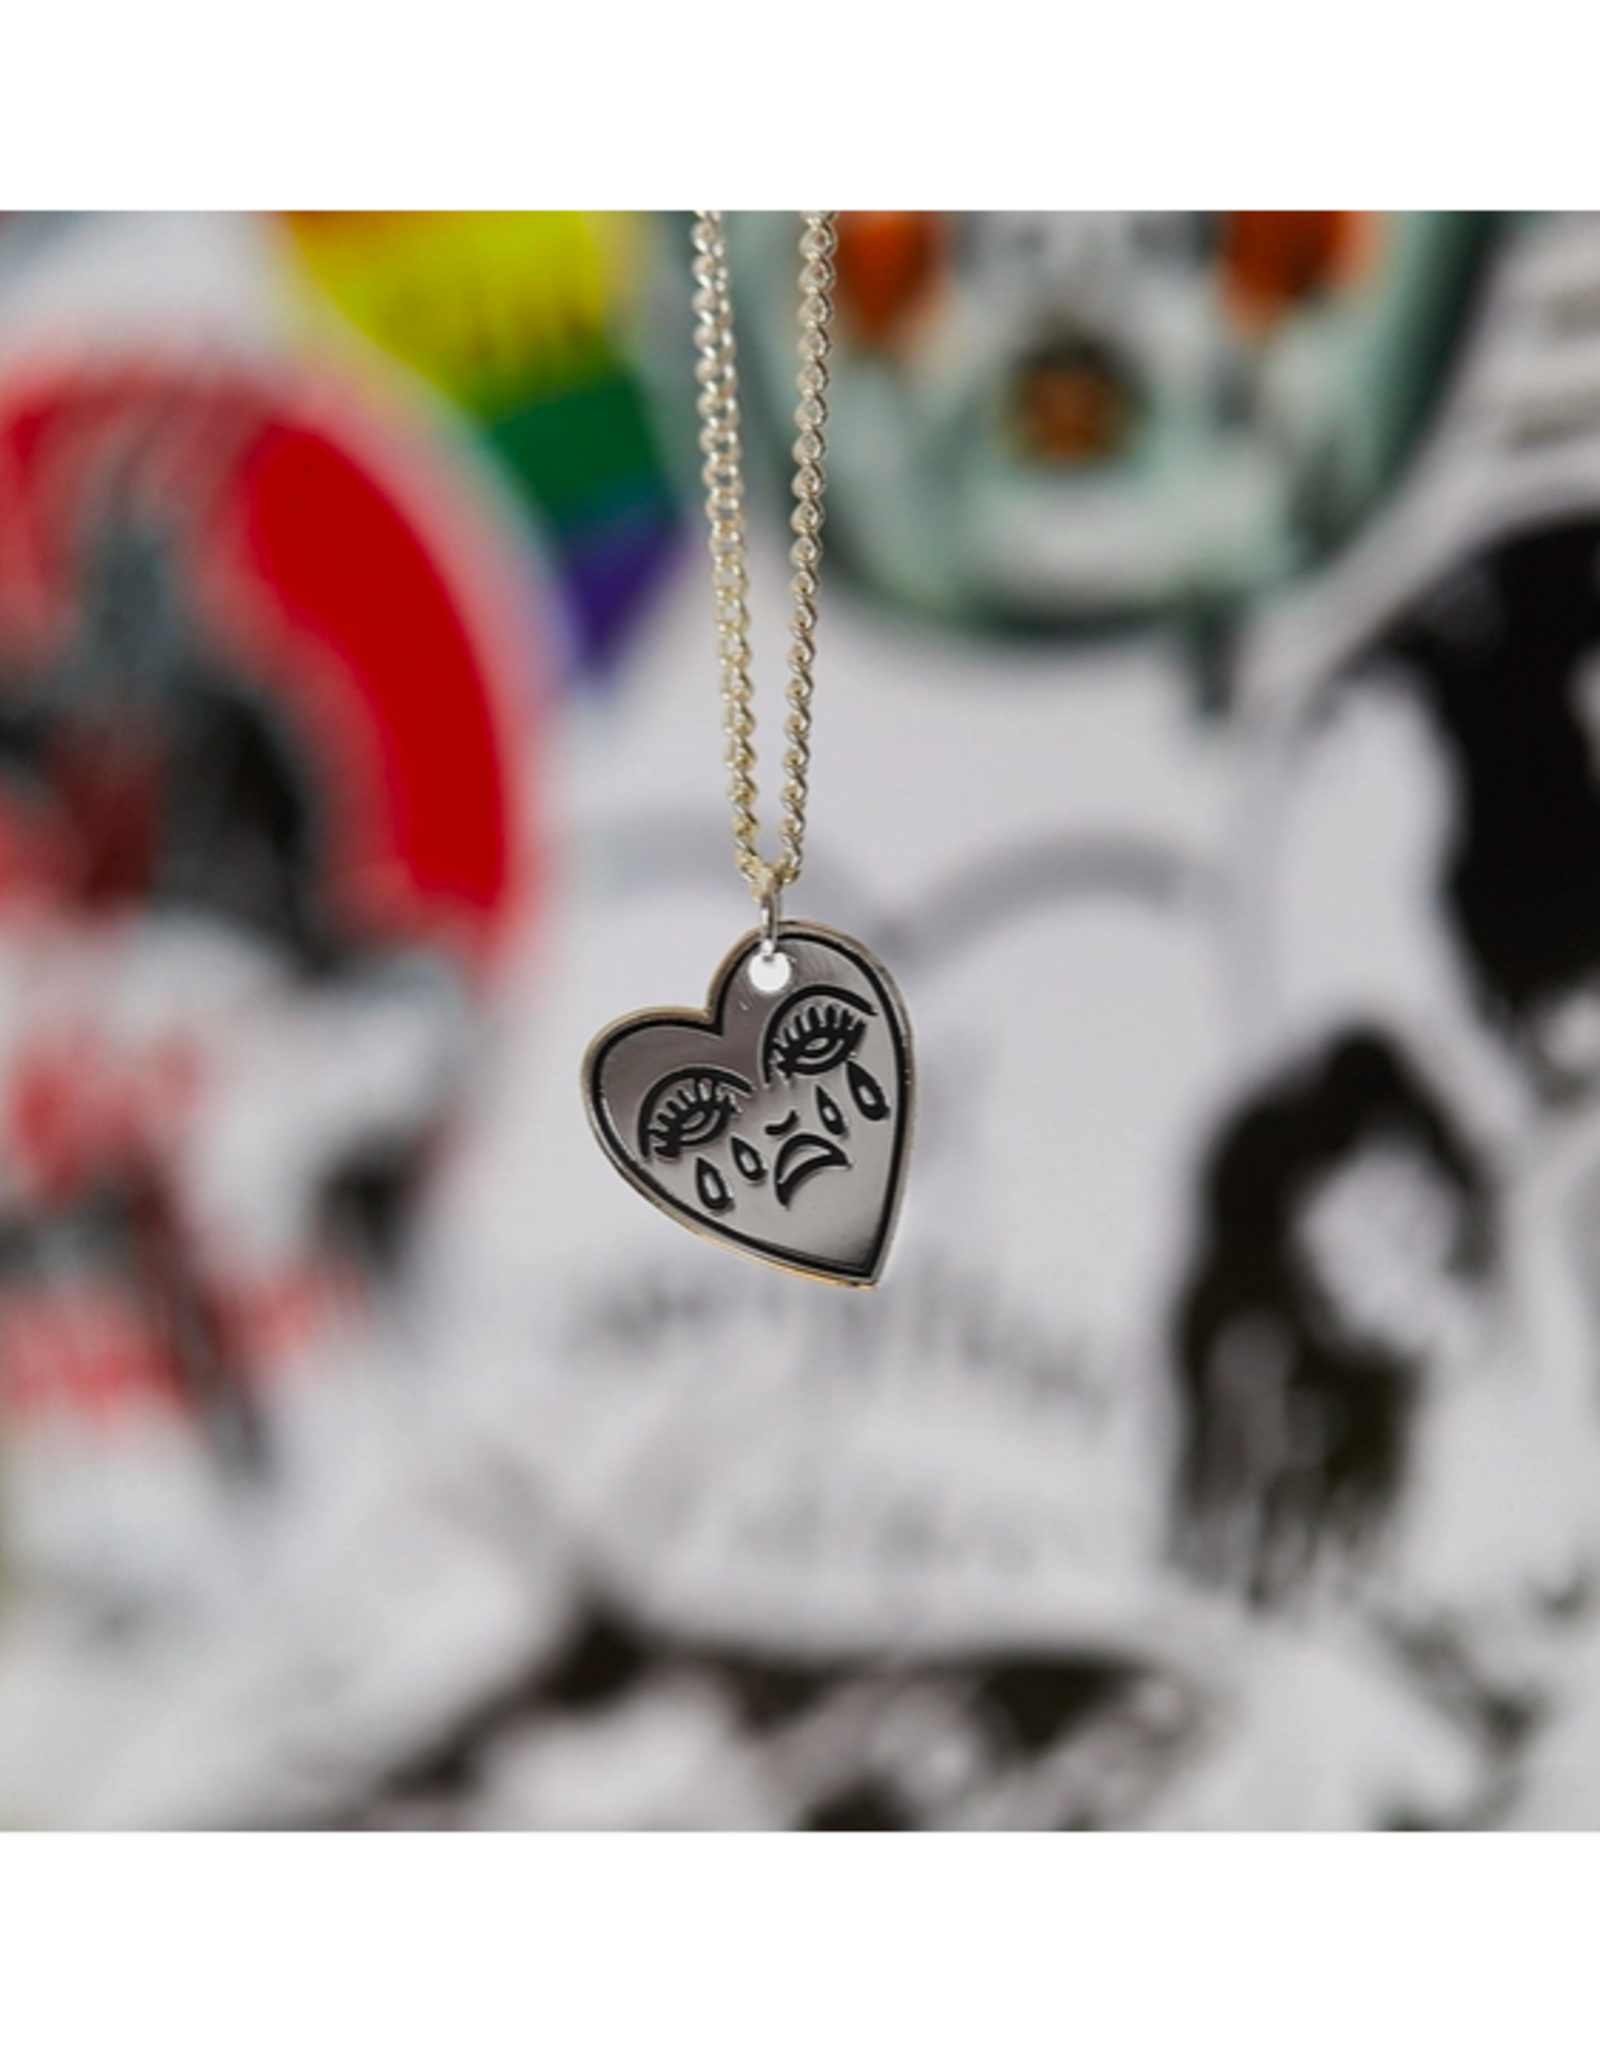 Crying Heart Charm Necklace - Silver